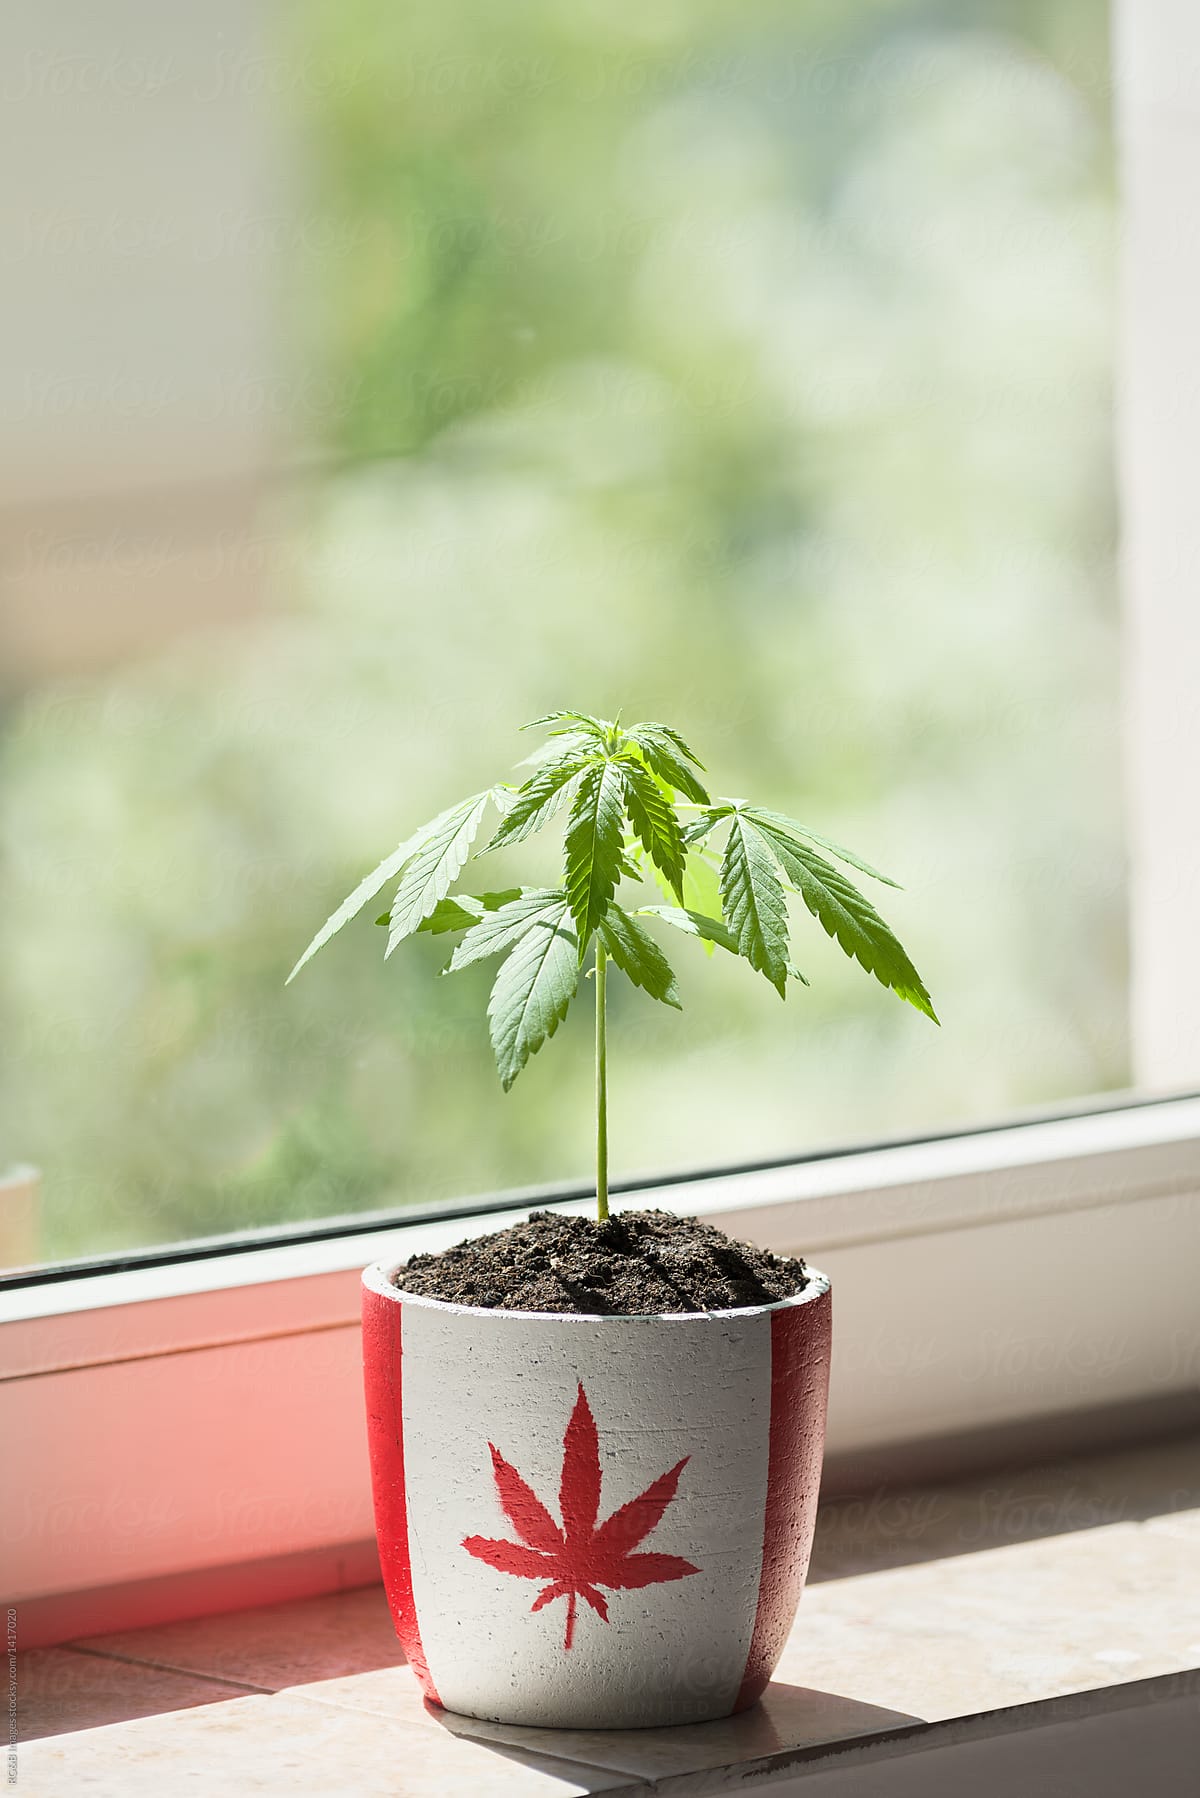 Potted marijuana plant suggesting legalization for recreational use in Canada